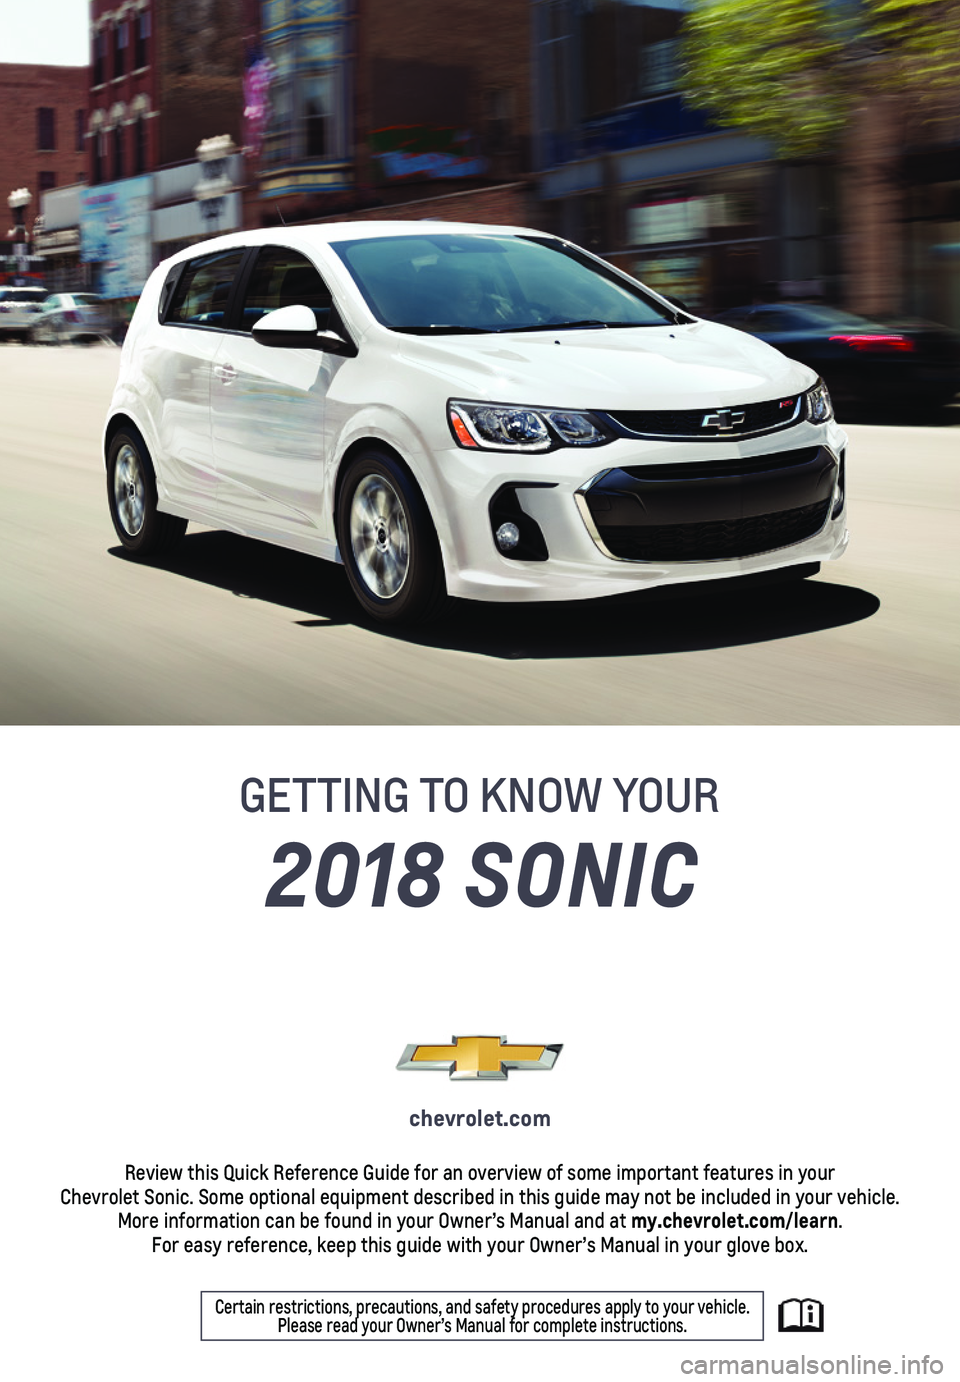 CHEVROLET SONIC 2018  Get To Know Guide 1
2018 SONIC
GETTING TO KNOW YOUR
chevrolet.com
Review this Quick Reference Guide for an overview of some important feat\
ures in your  Chevrolet Sonic. Some optional equipment described in this guide